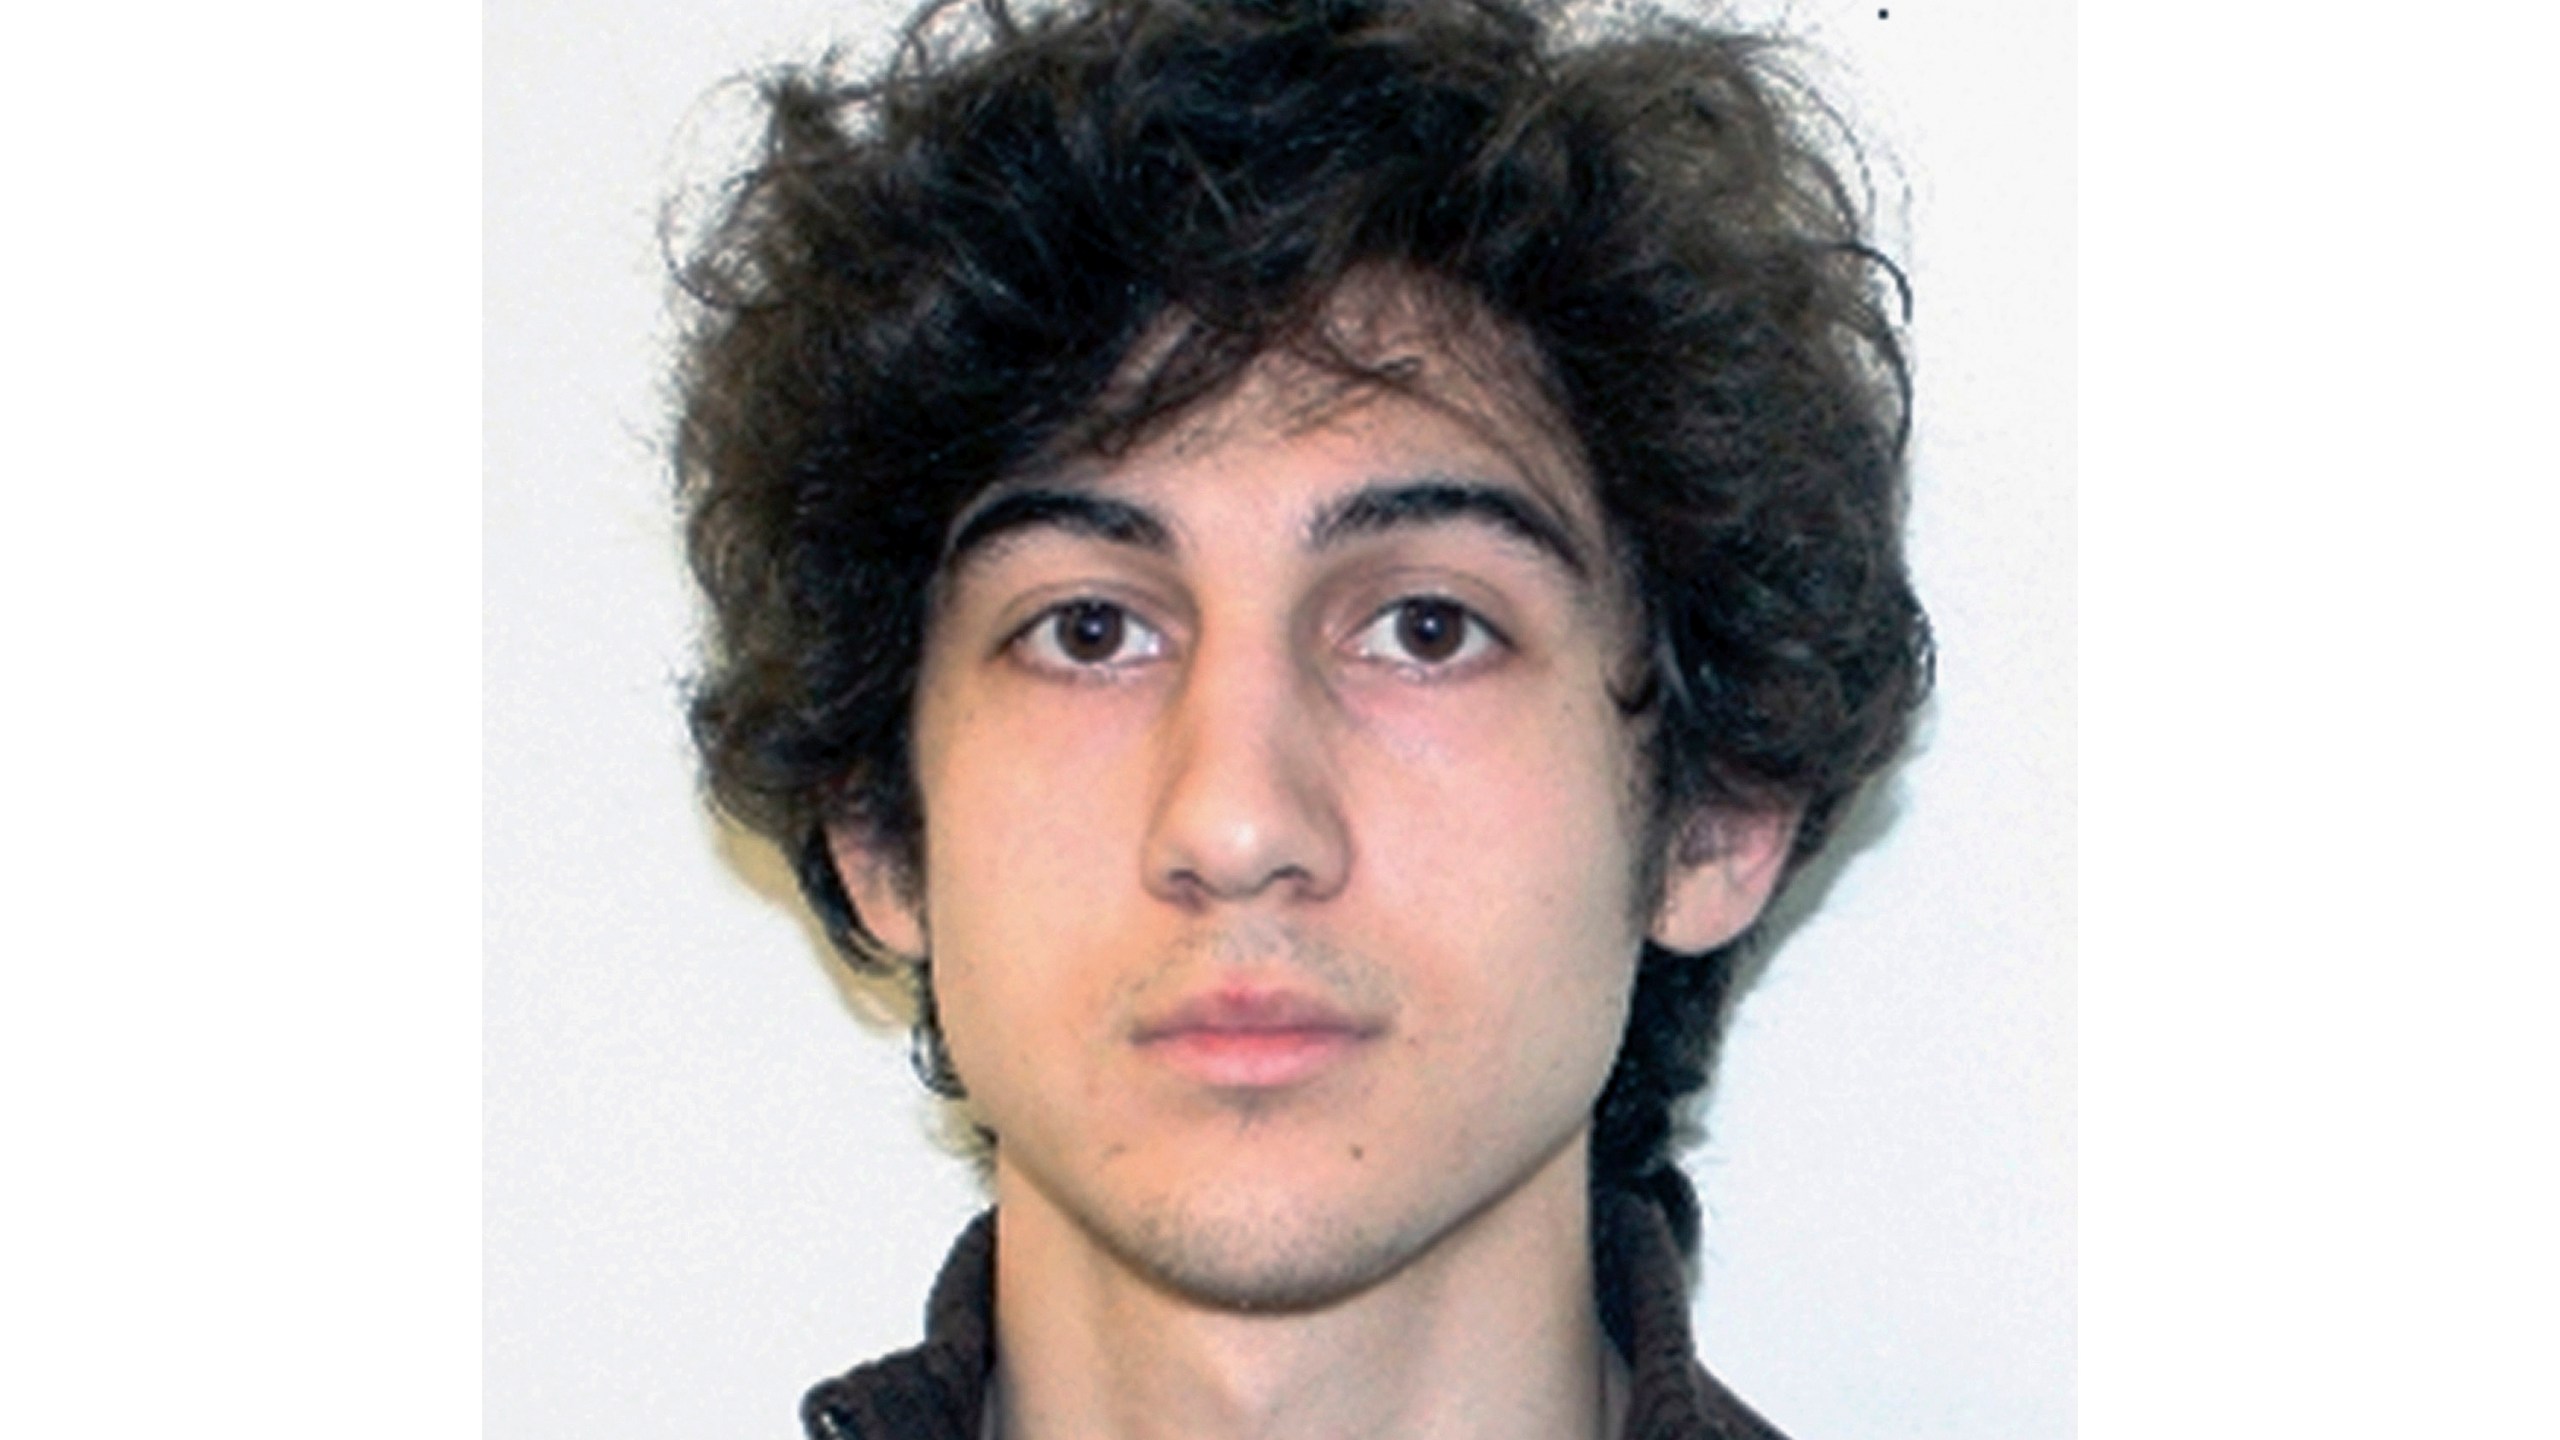 FILE - Dzhokhar Tsarnaev is pictured in this photograph released by the Federal Bureau of Investigation on April 19, 2013. A federal appeals court has ordered Boston Marathon bomber Dzhokhar Tsarnaev's case to be returned to a lower court to probe claims of juror bias. The order from the 1st U.S. Circuit Court of Appeals keeps intact Tsarnaev's death sentence for now (FBI via AP, File)